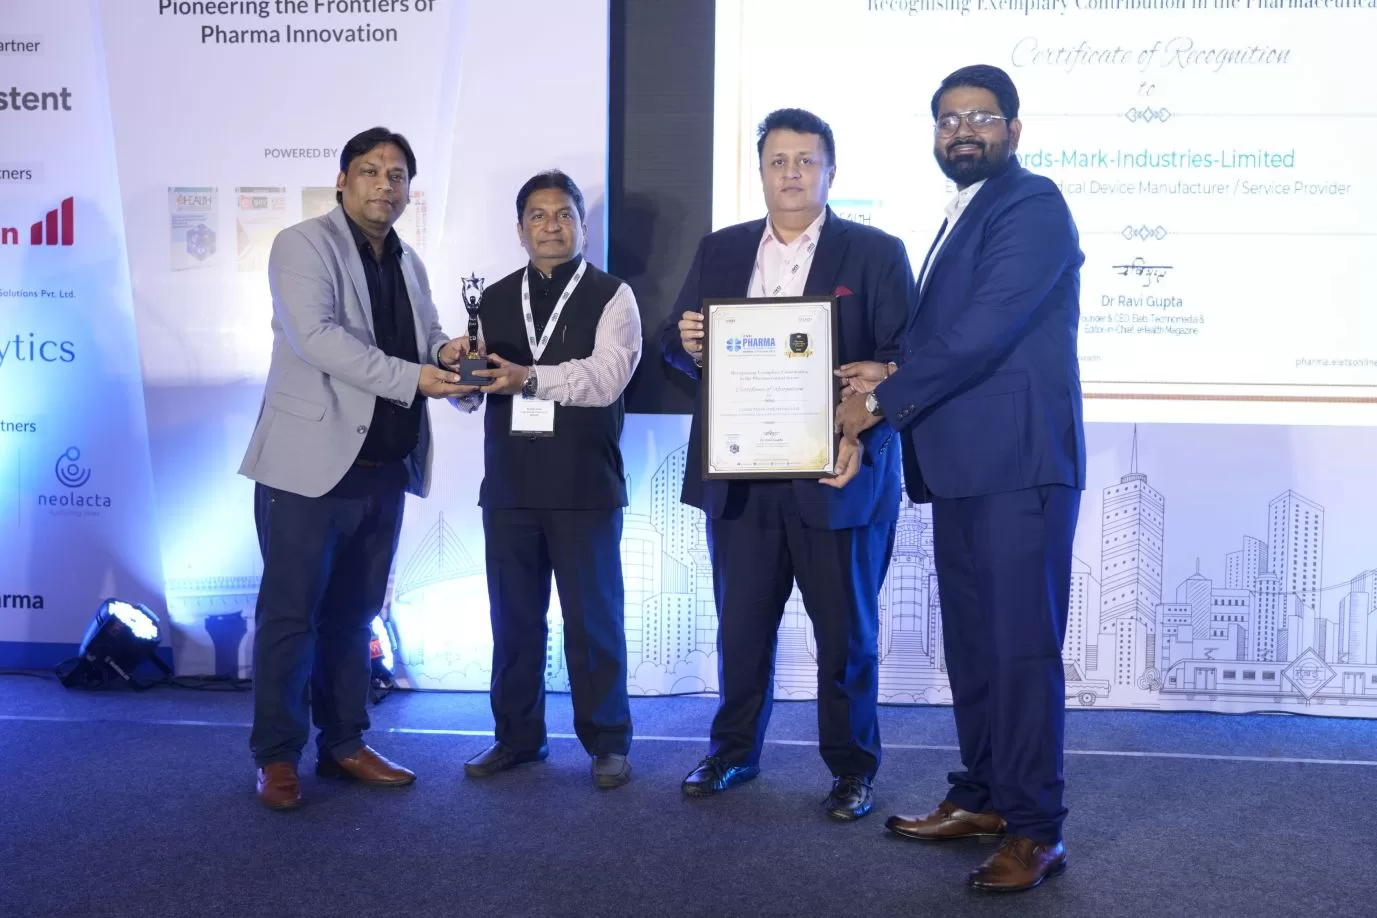 Lord's Mark Industries bags Excellence in Medical Device Manufacturer and Service Provider Award 2023.jpg